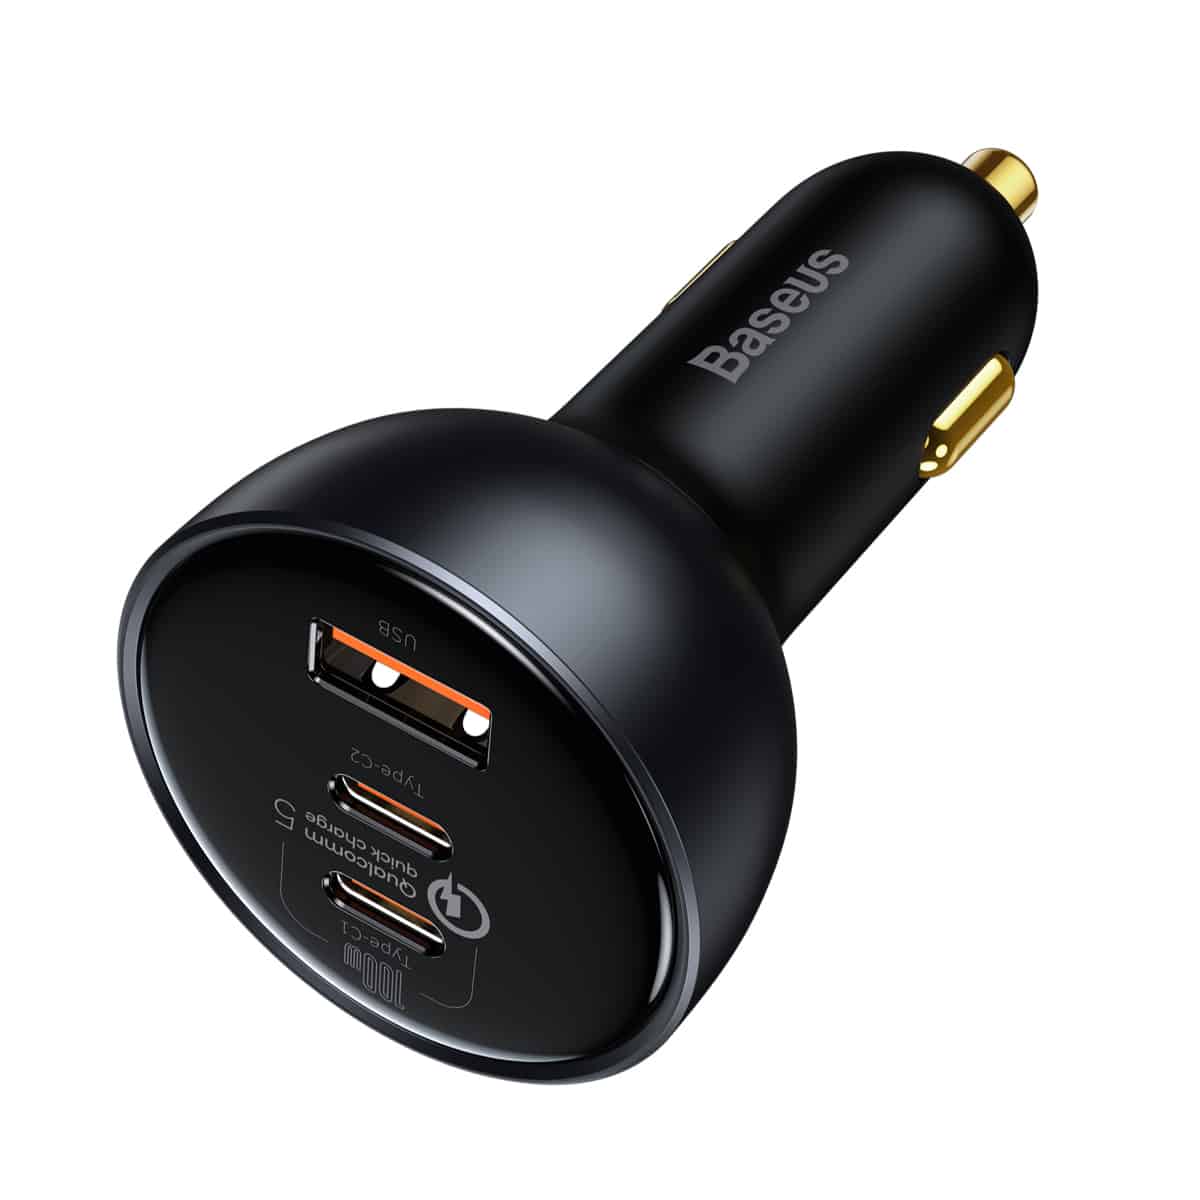 Baseus Qualcomm® Quick Charge™ 5 Technology Multi-Port Fast Charge Car Charger C+C+U 160W set Gray (with Baseus Xiaobai series fast charging Cable Type-C to Type-C 100W (20V/5A) 1m Black)